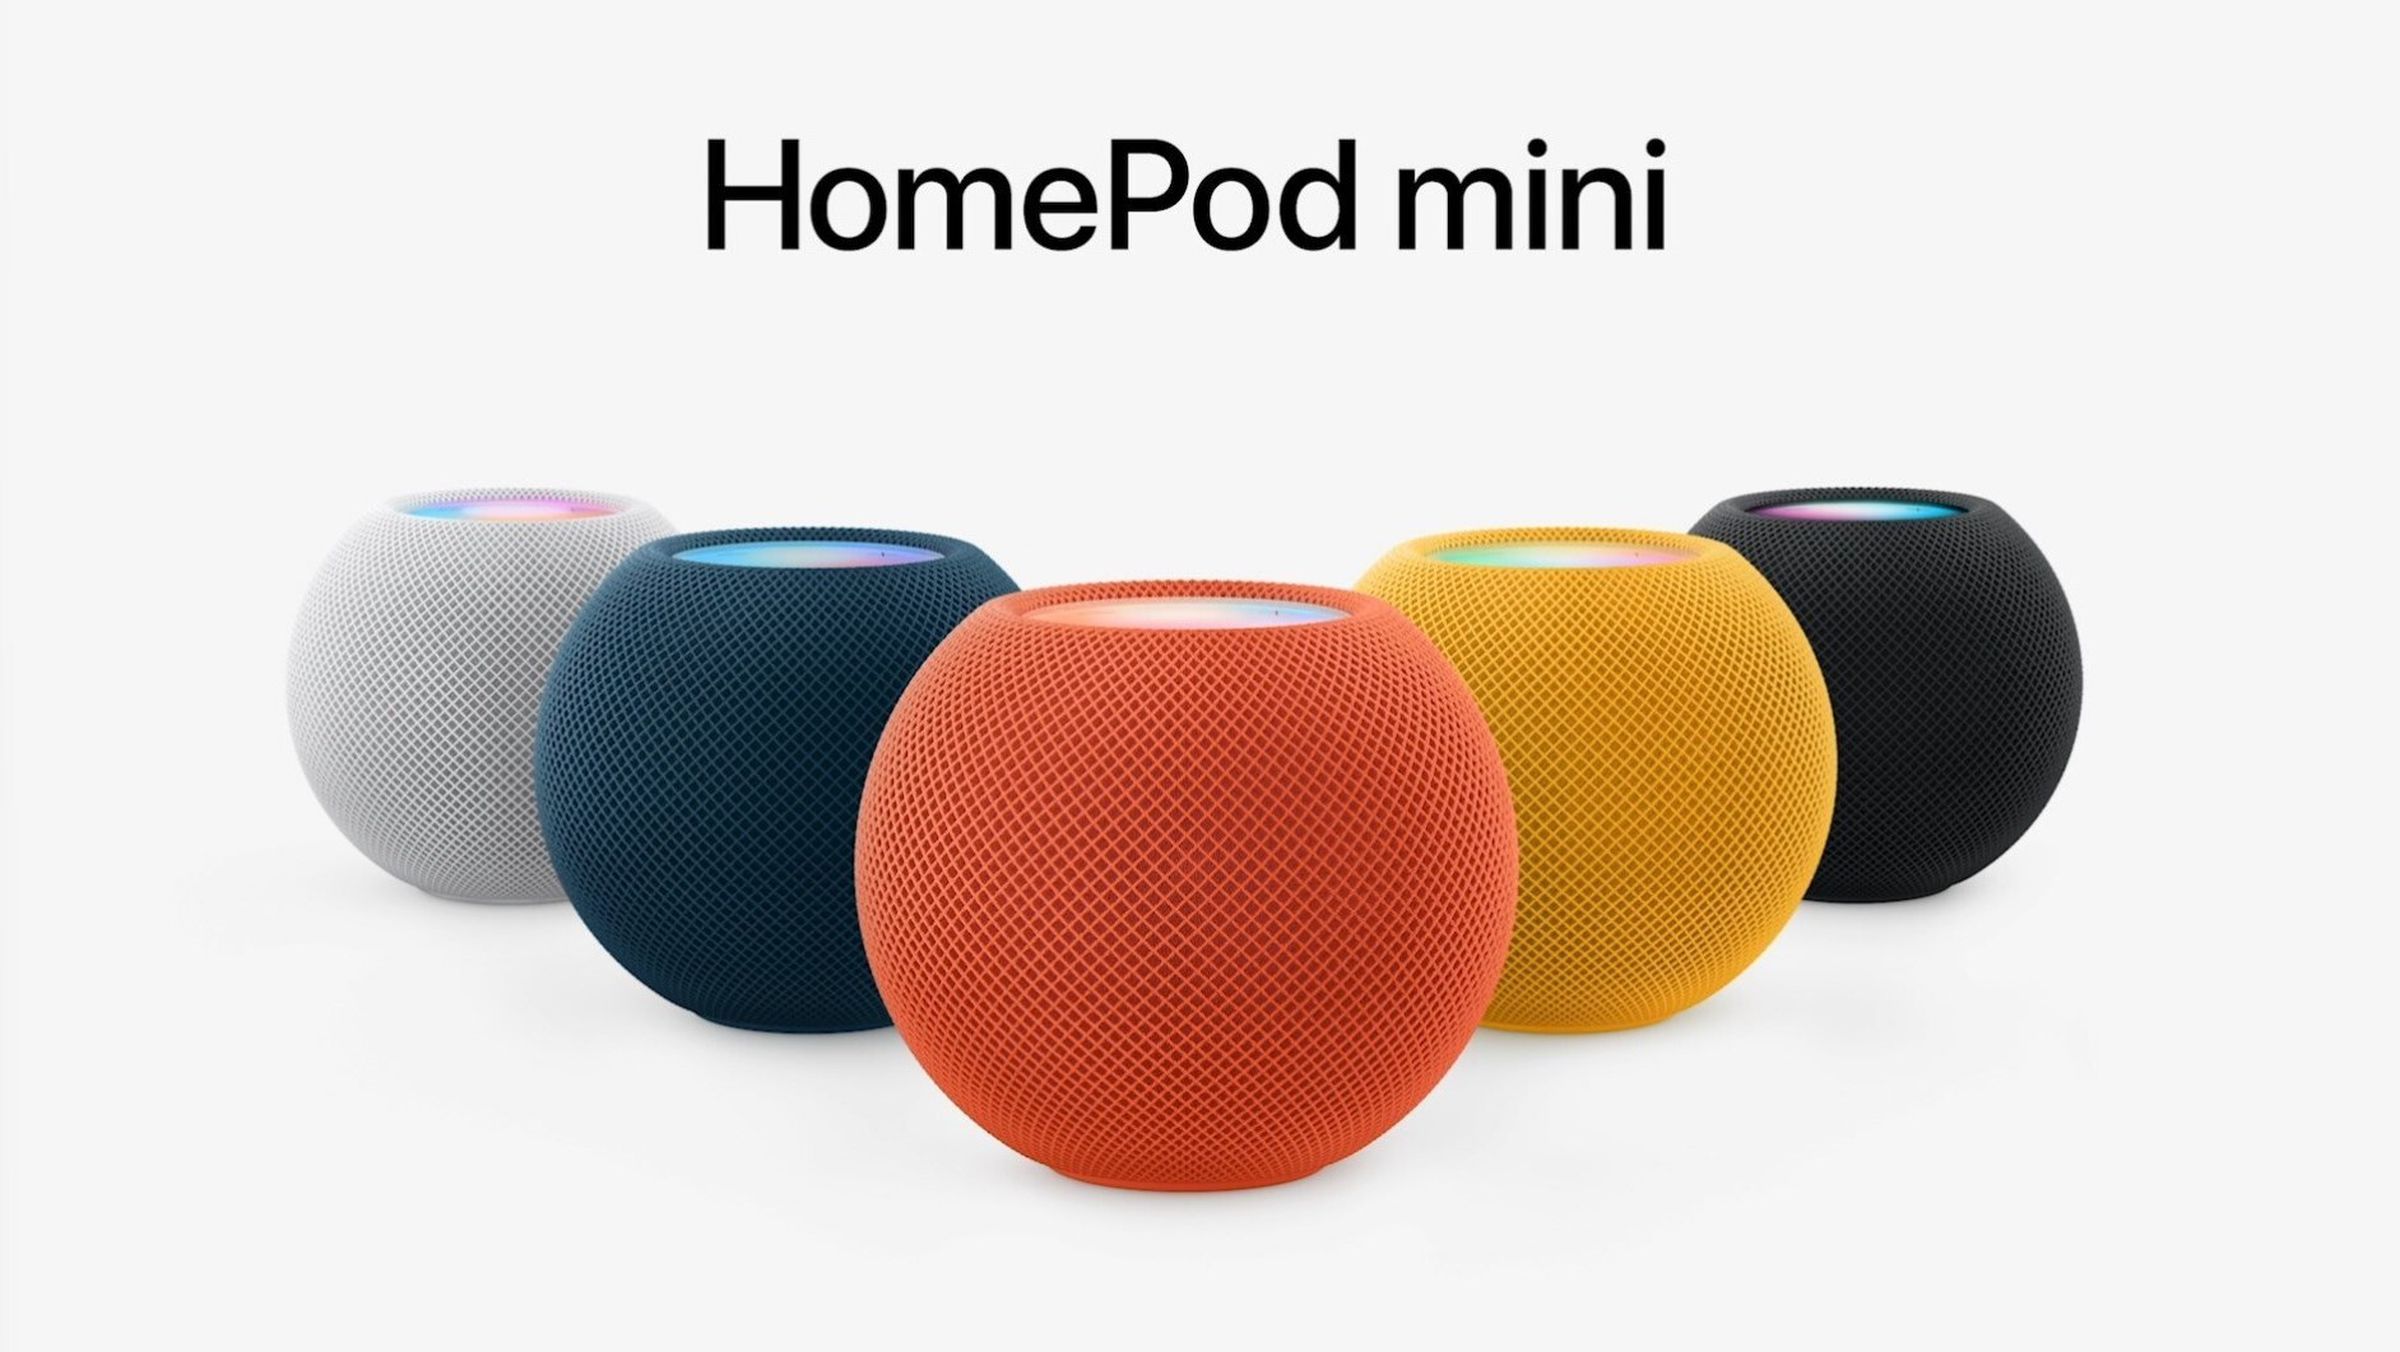 The HomePod Mini now comes in new colors.